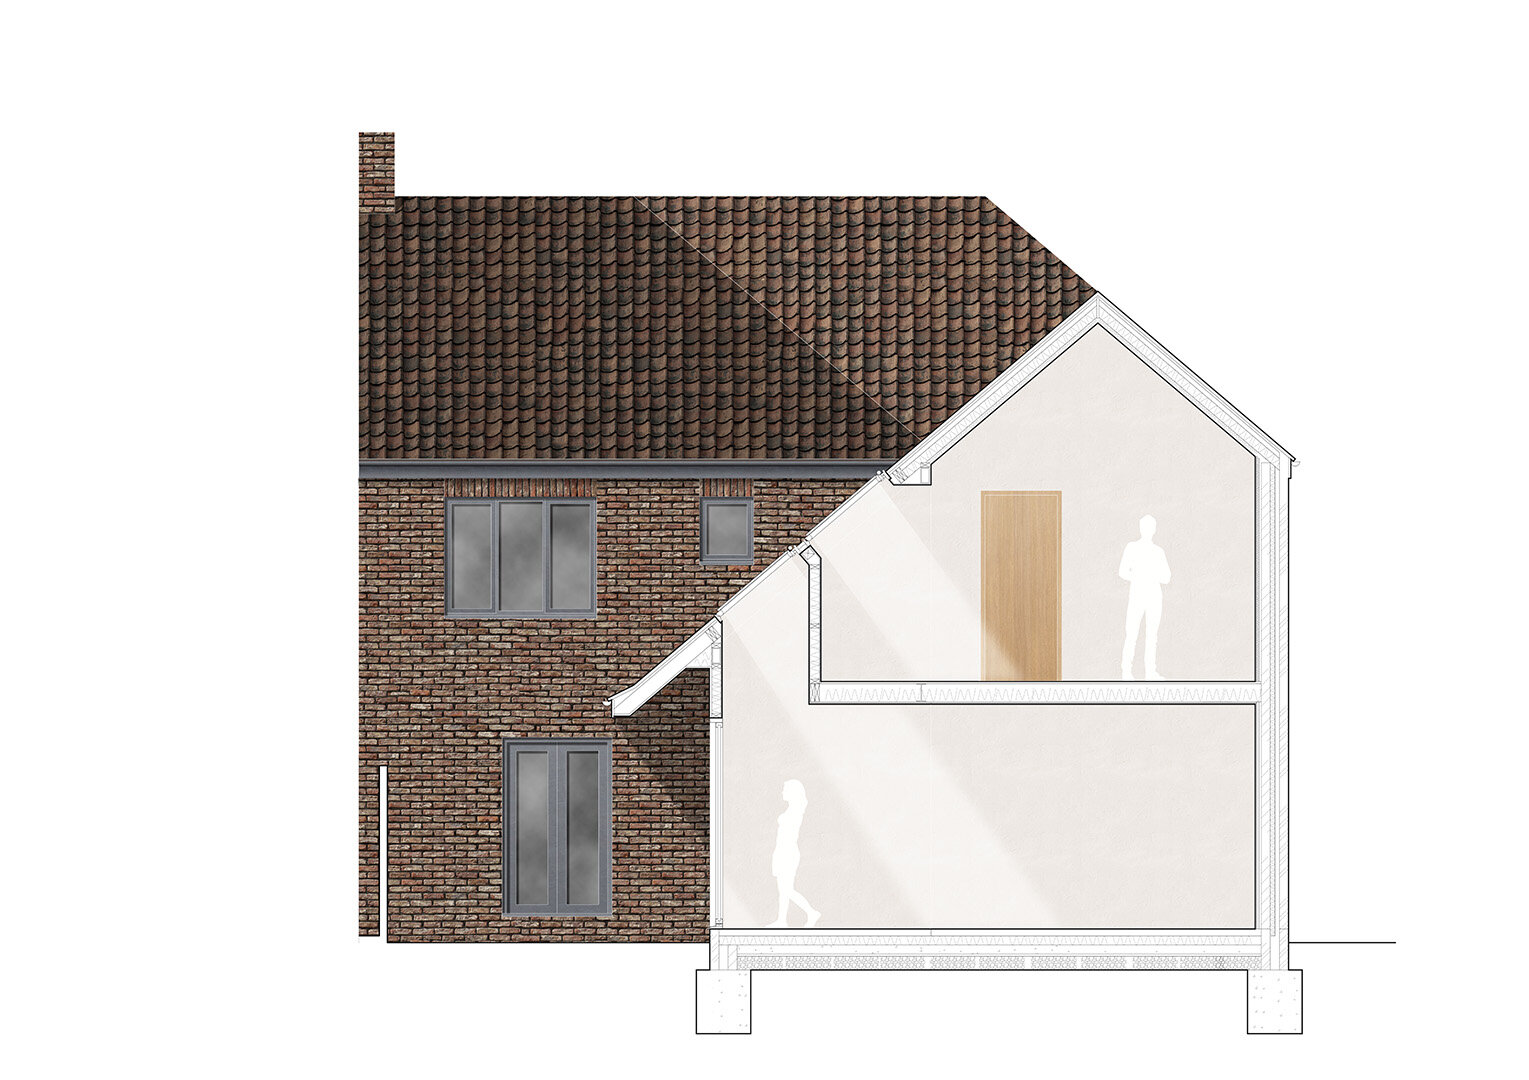 Market Weighton Solar Home - Section Proposed - Samuel Kendall Associates